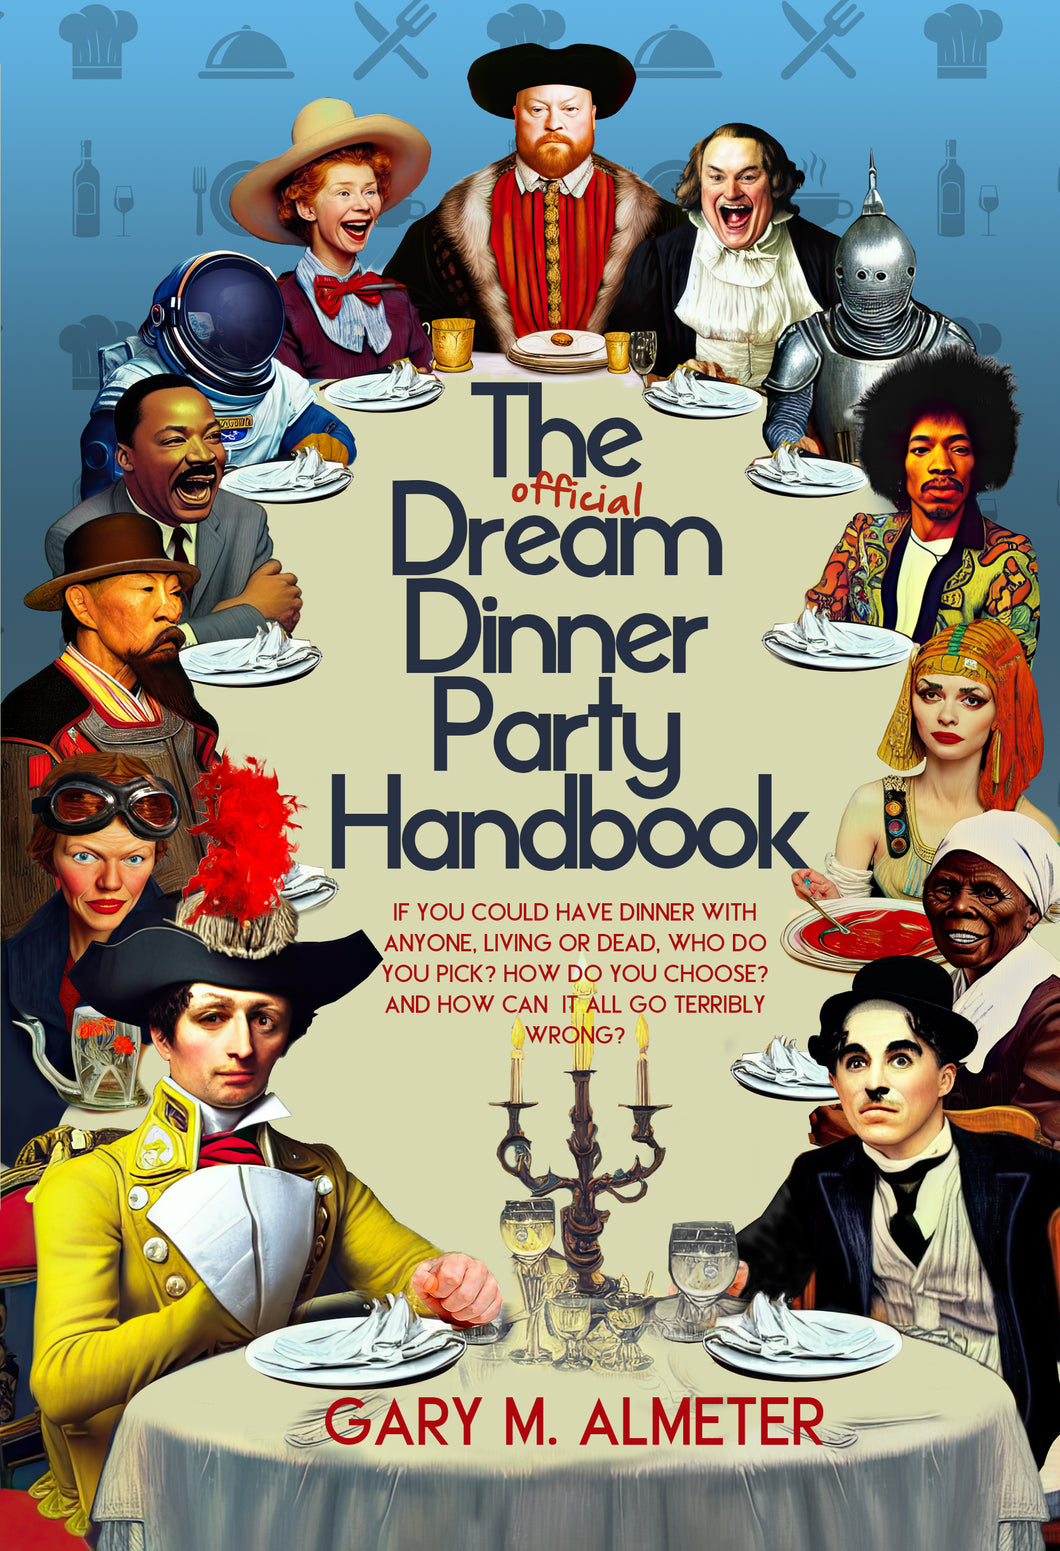 The Official Dream Dinner Party Handbook: If you could have dinner with anyone, living or dead, who do you pick? How do you choose? And how can it all go terribly wrong?